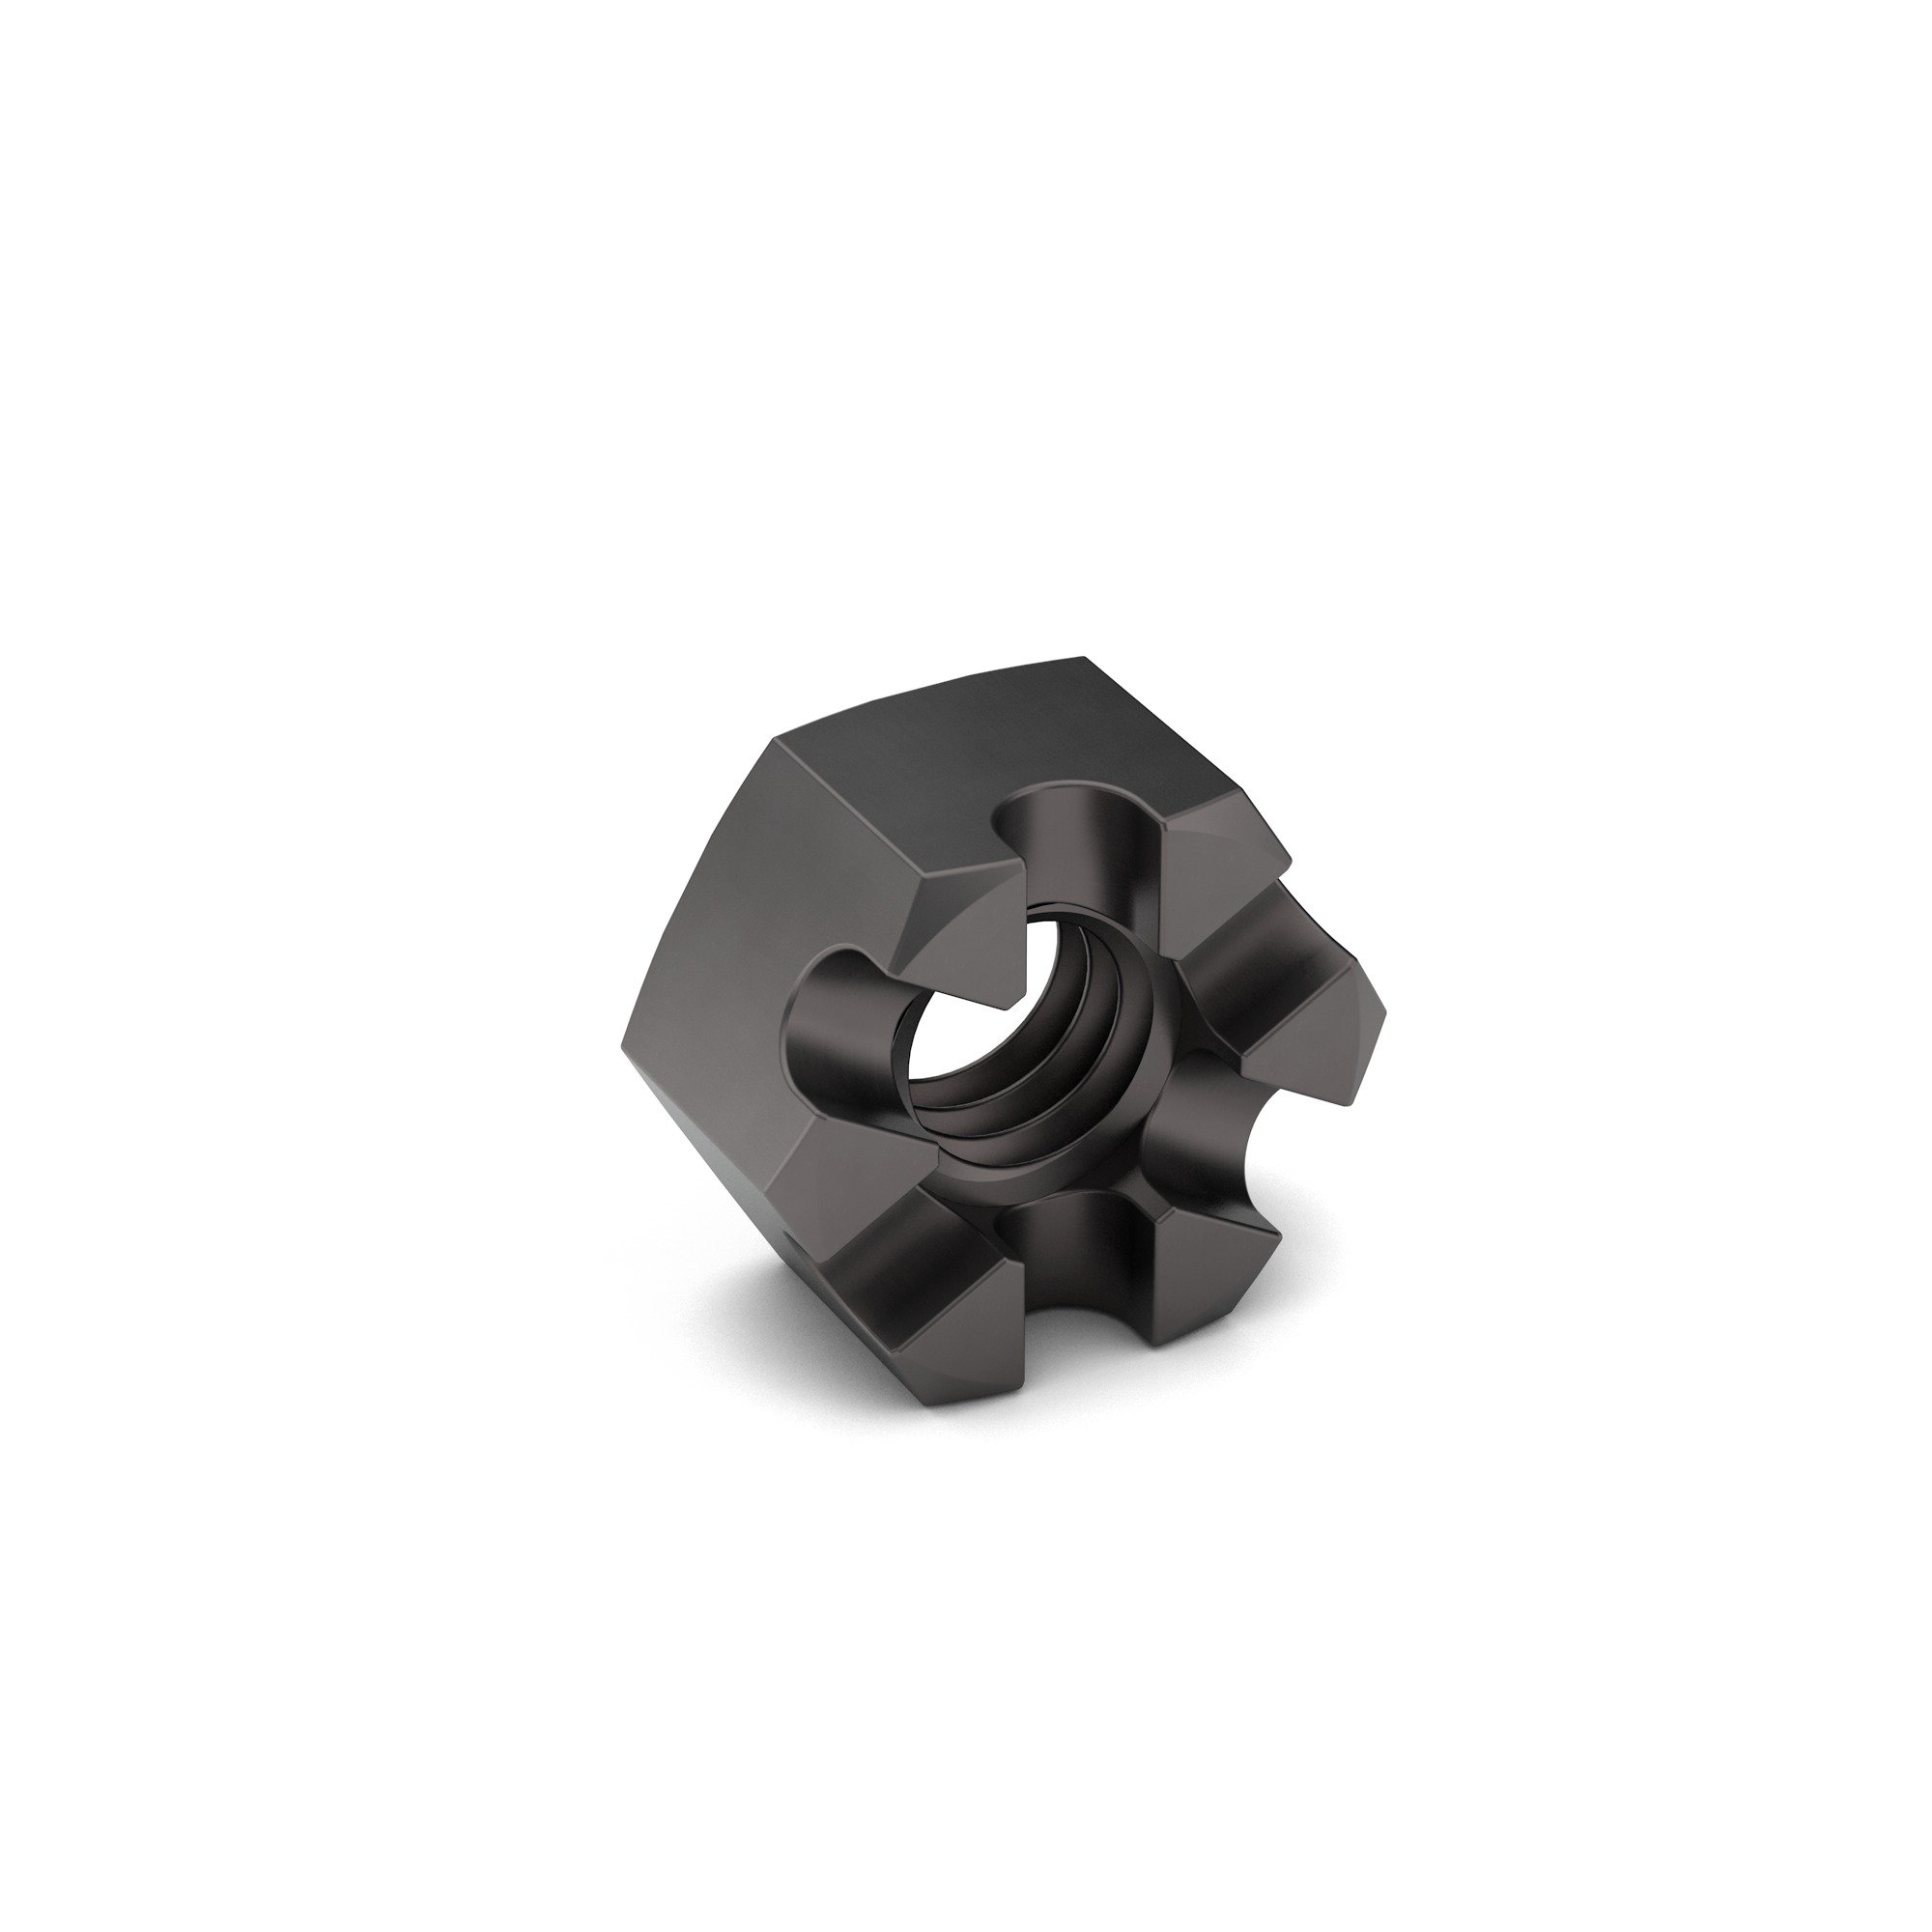 1 1/4-12 Carbon Steel Slotted Hex Nut Plain Finish